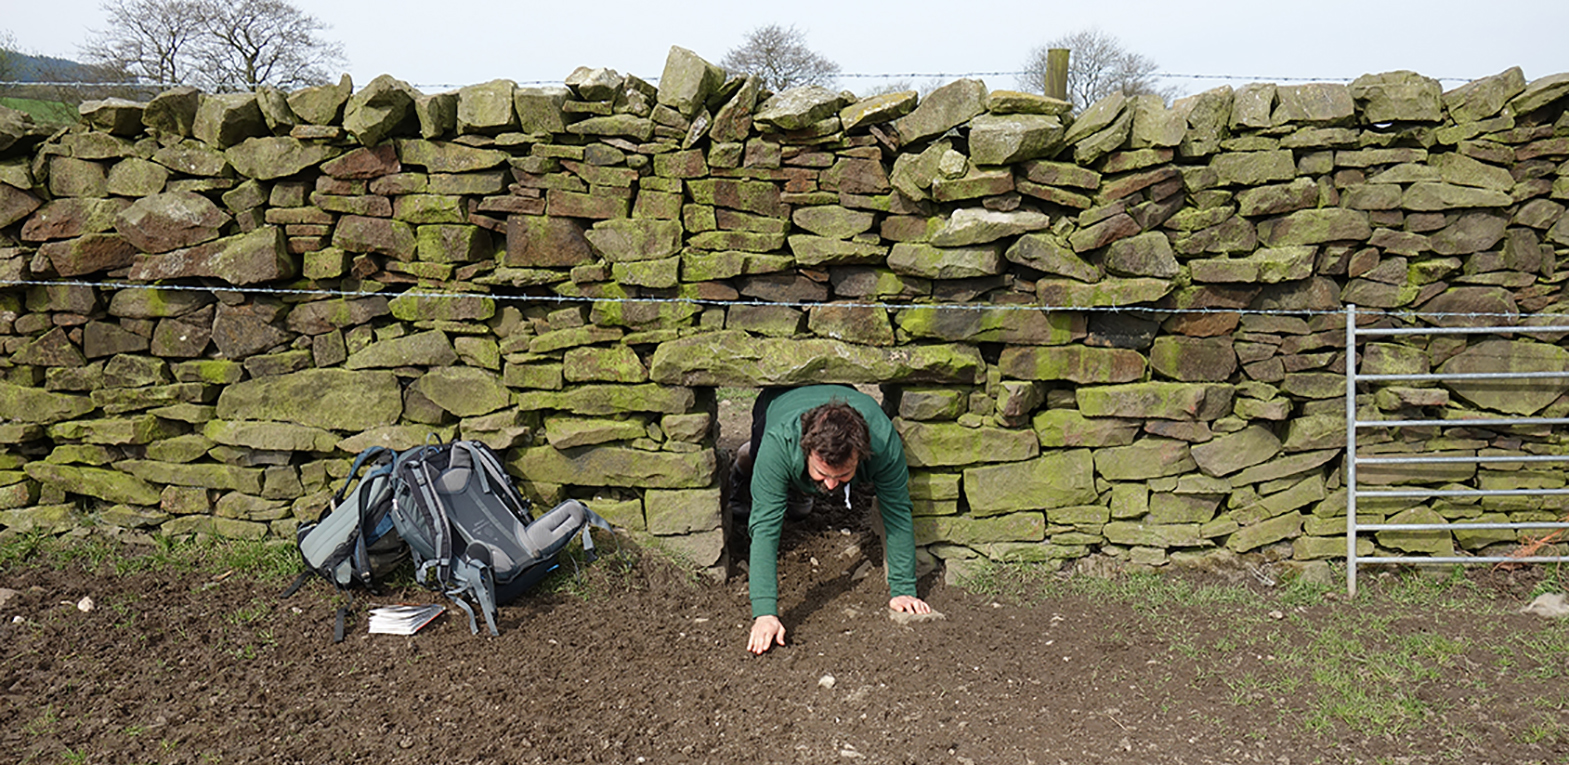 A photograph from the boundary walk. A man crawls through a hole in a stone wall.